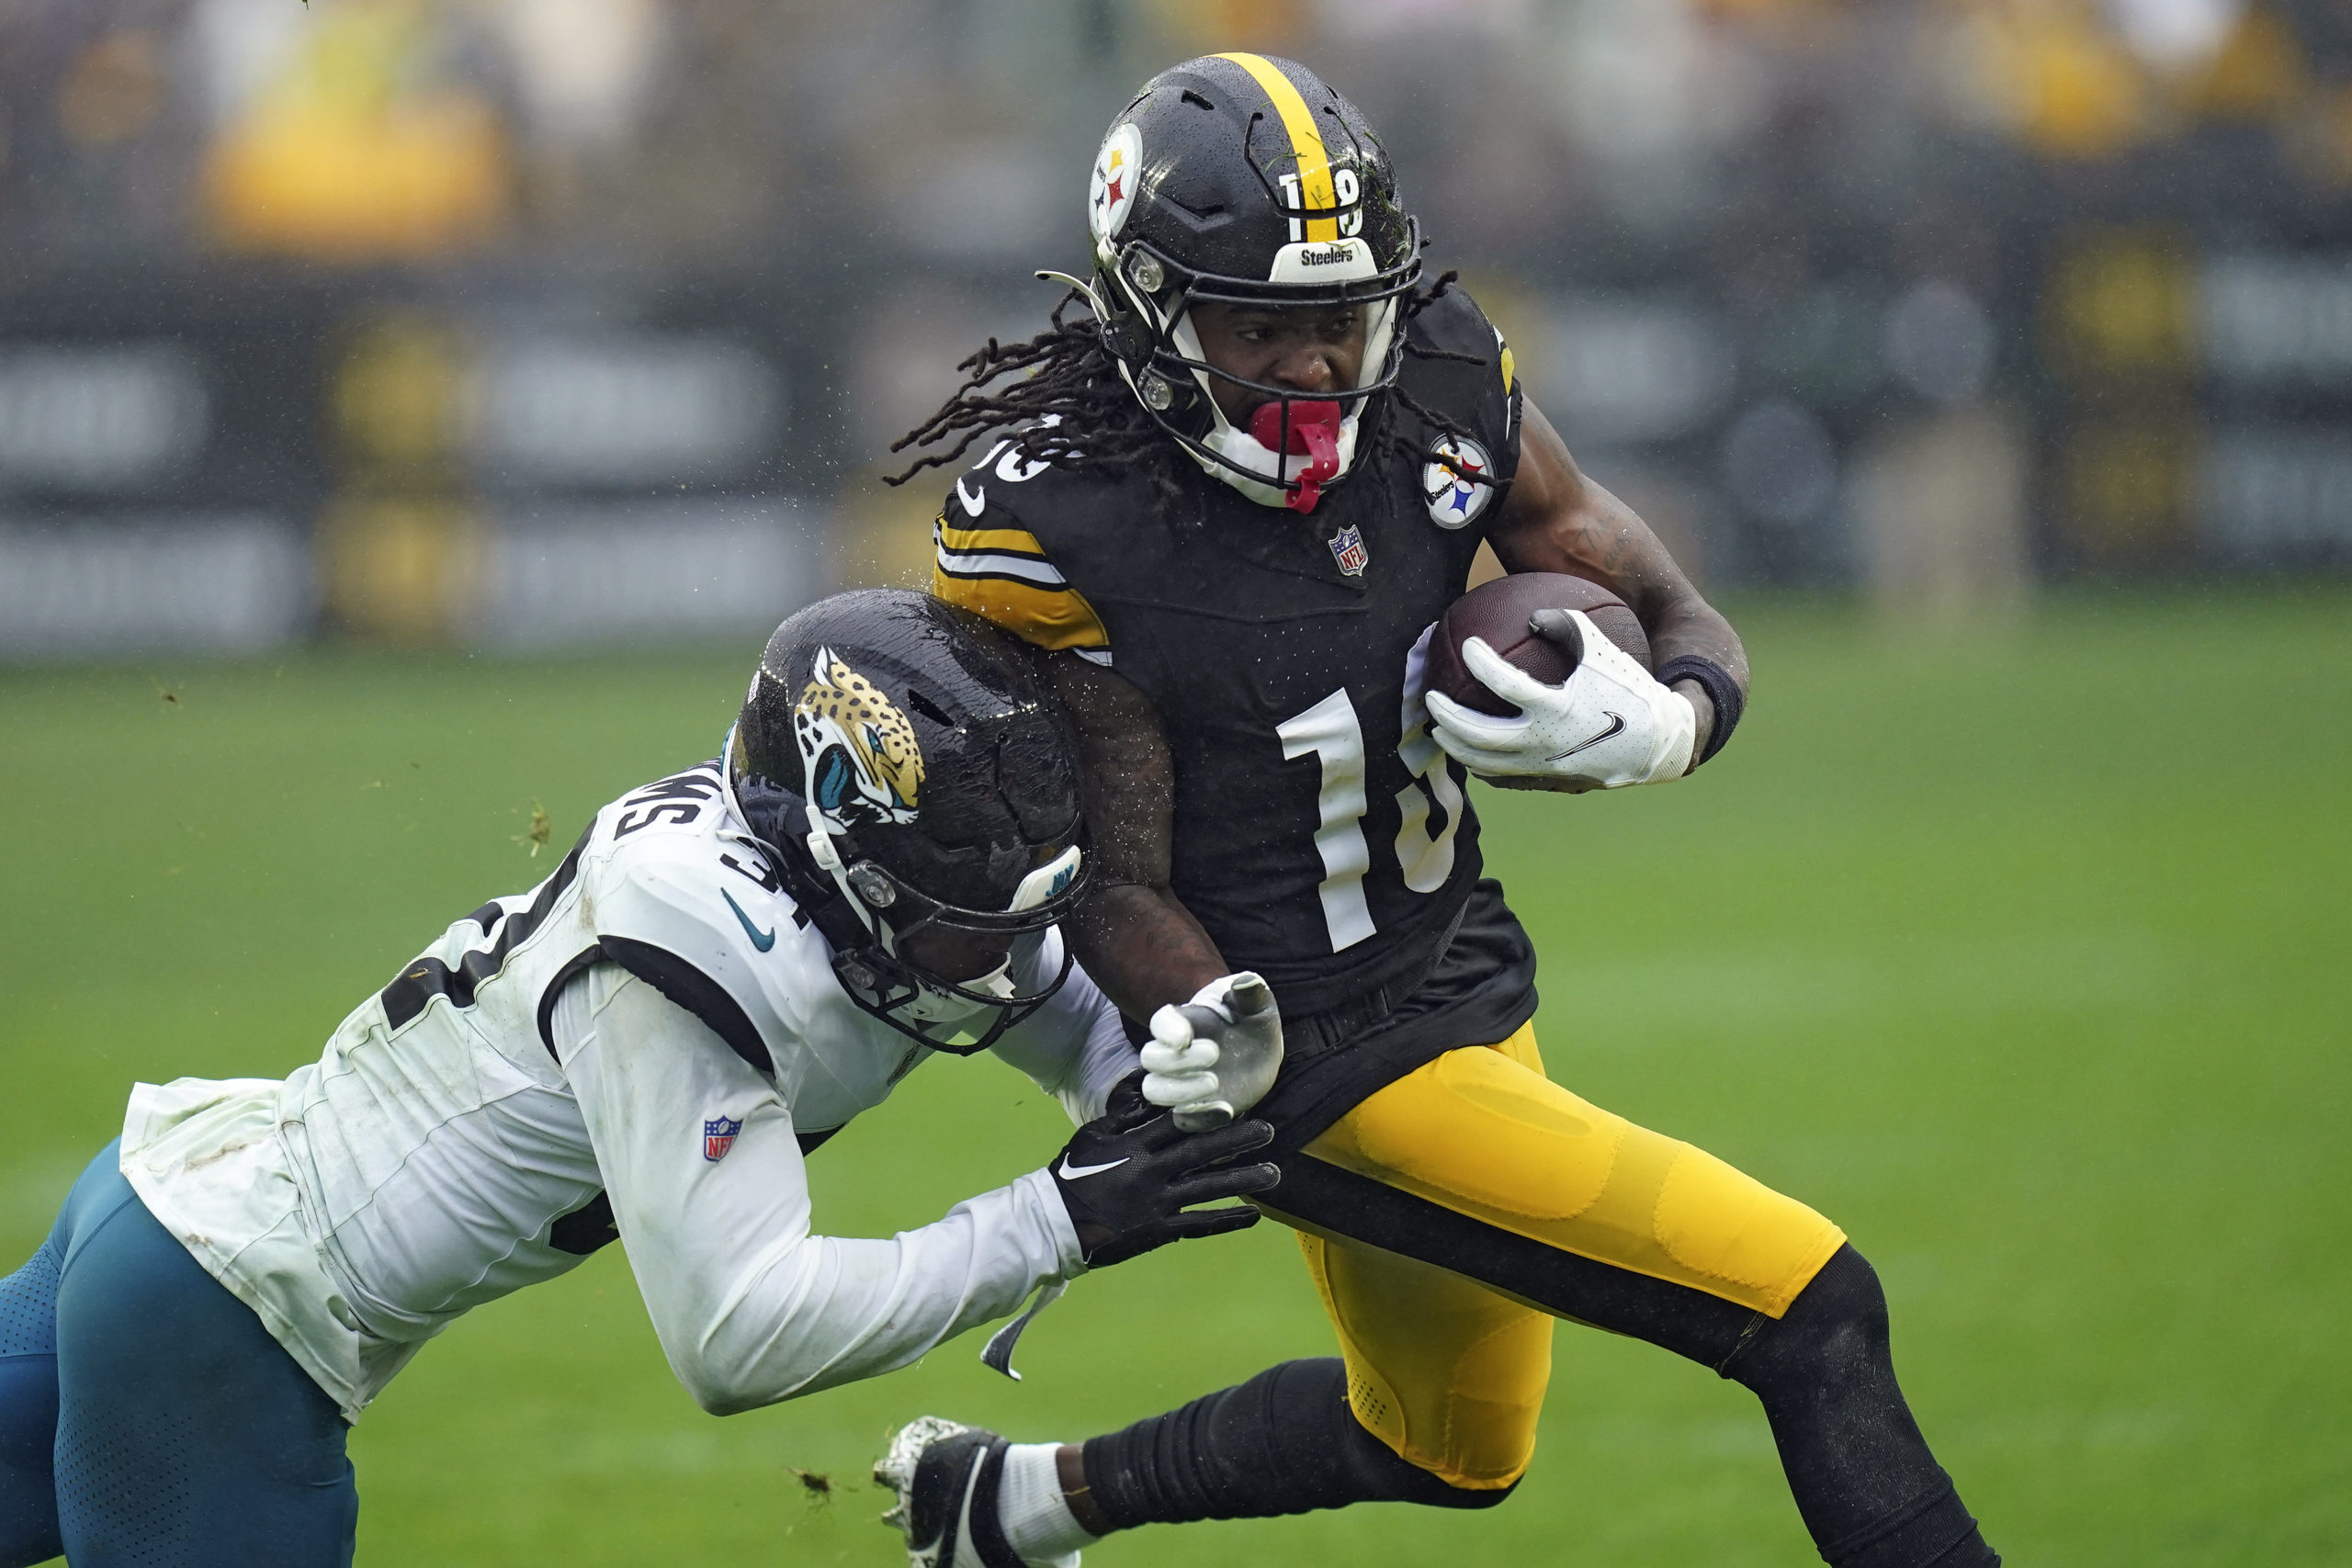 Pittsburgh Steelers wide receiver Diontae Johnson runs past Jacksonville Jaguars cornerback Darious Williams during the first half of Sunday's game in Pittsburgh, Pennsylvania.